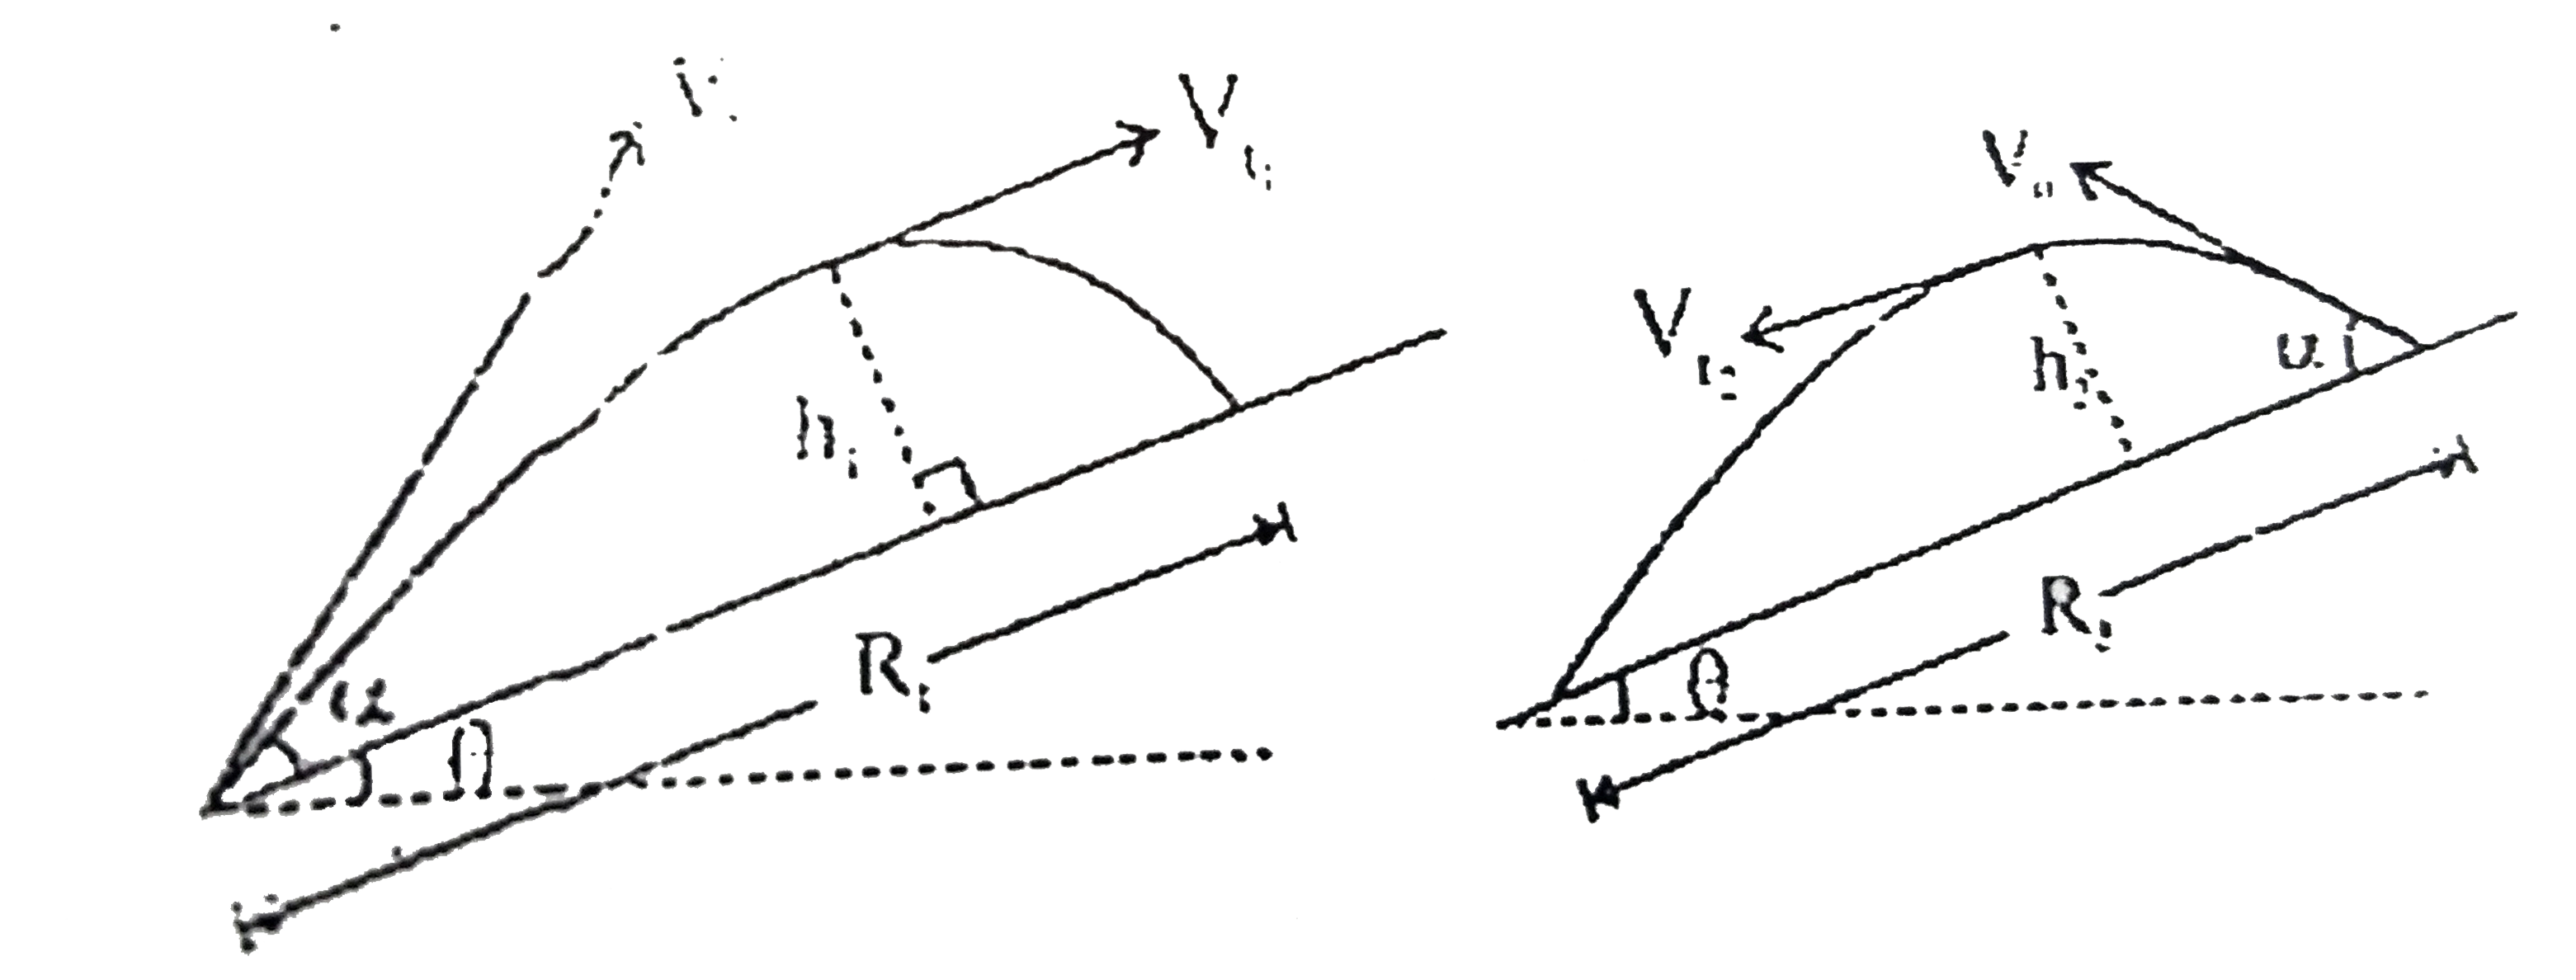 Two balls are thrown from an inclined plane at angle of projection with the plane, one up the incline and the other down the incline as shown. Which one is not correct?